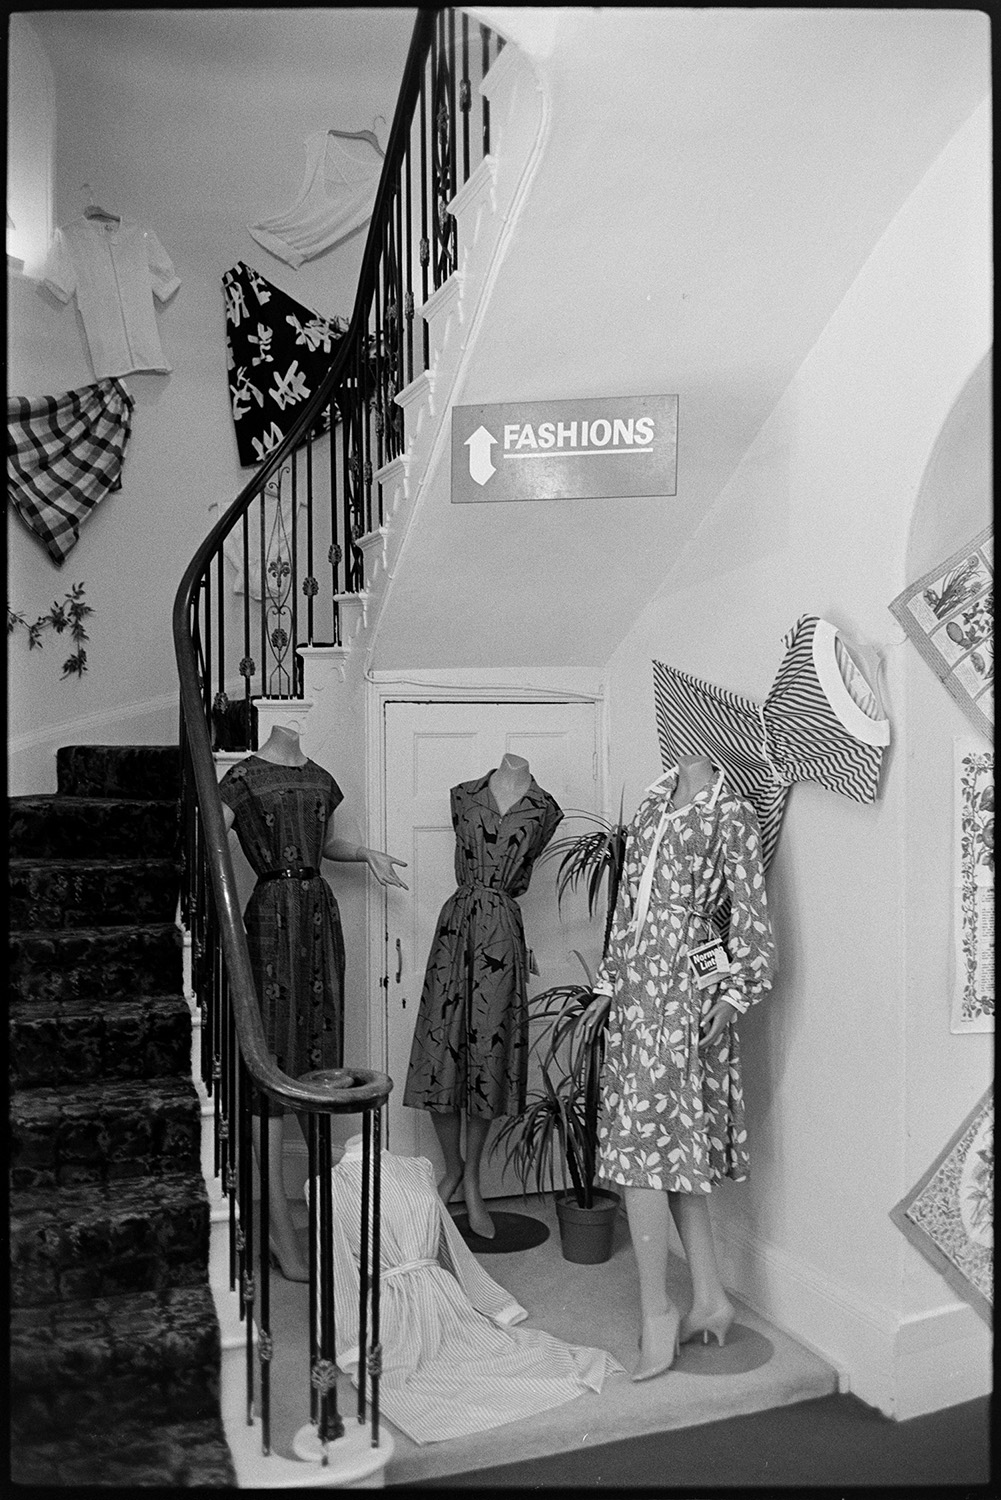 Interior of clothes shop. Various counters, proprietor chatting, window and hat display. 
[A display of women's dresses by a staircase in Trapnells clothes shop in Bideford High Street. The dresses are on mannequins. Skirts and blouses are displayed on the wall by the stairs.]